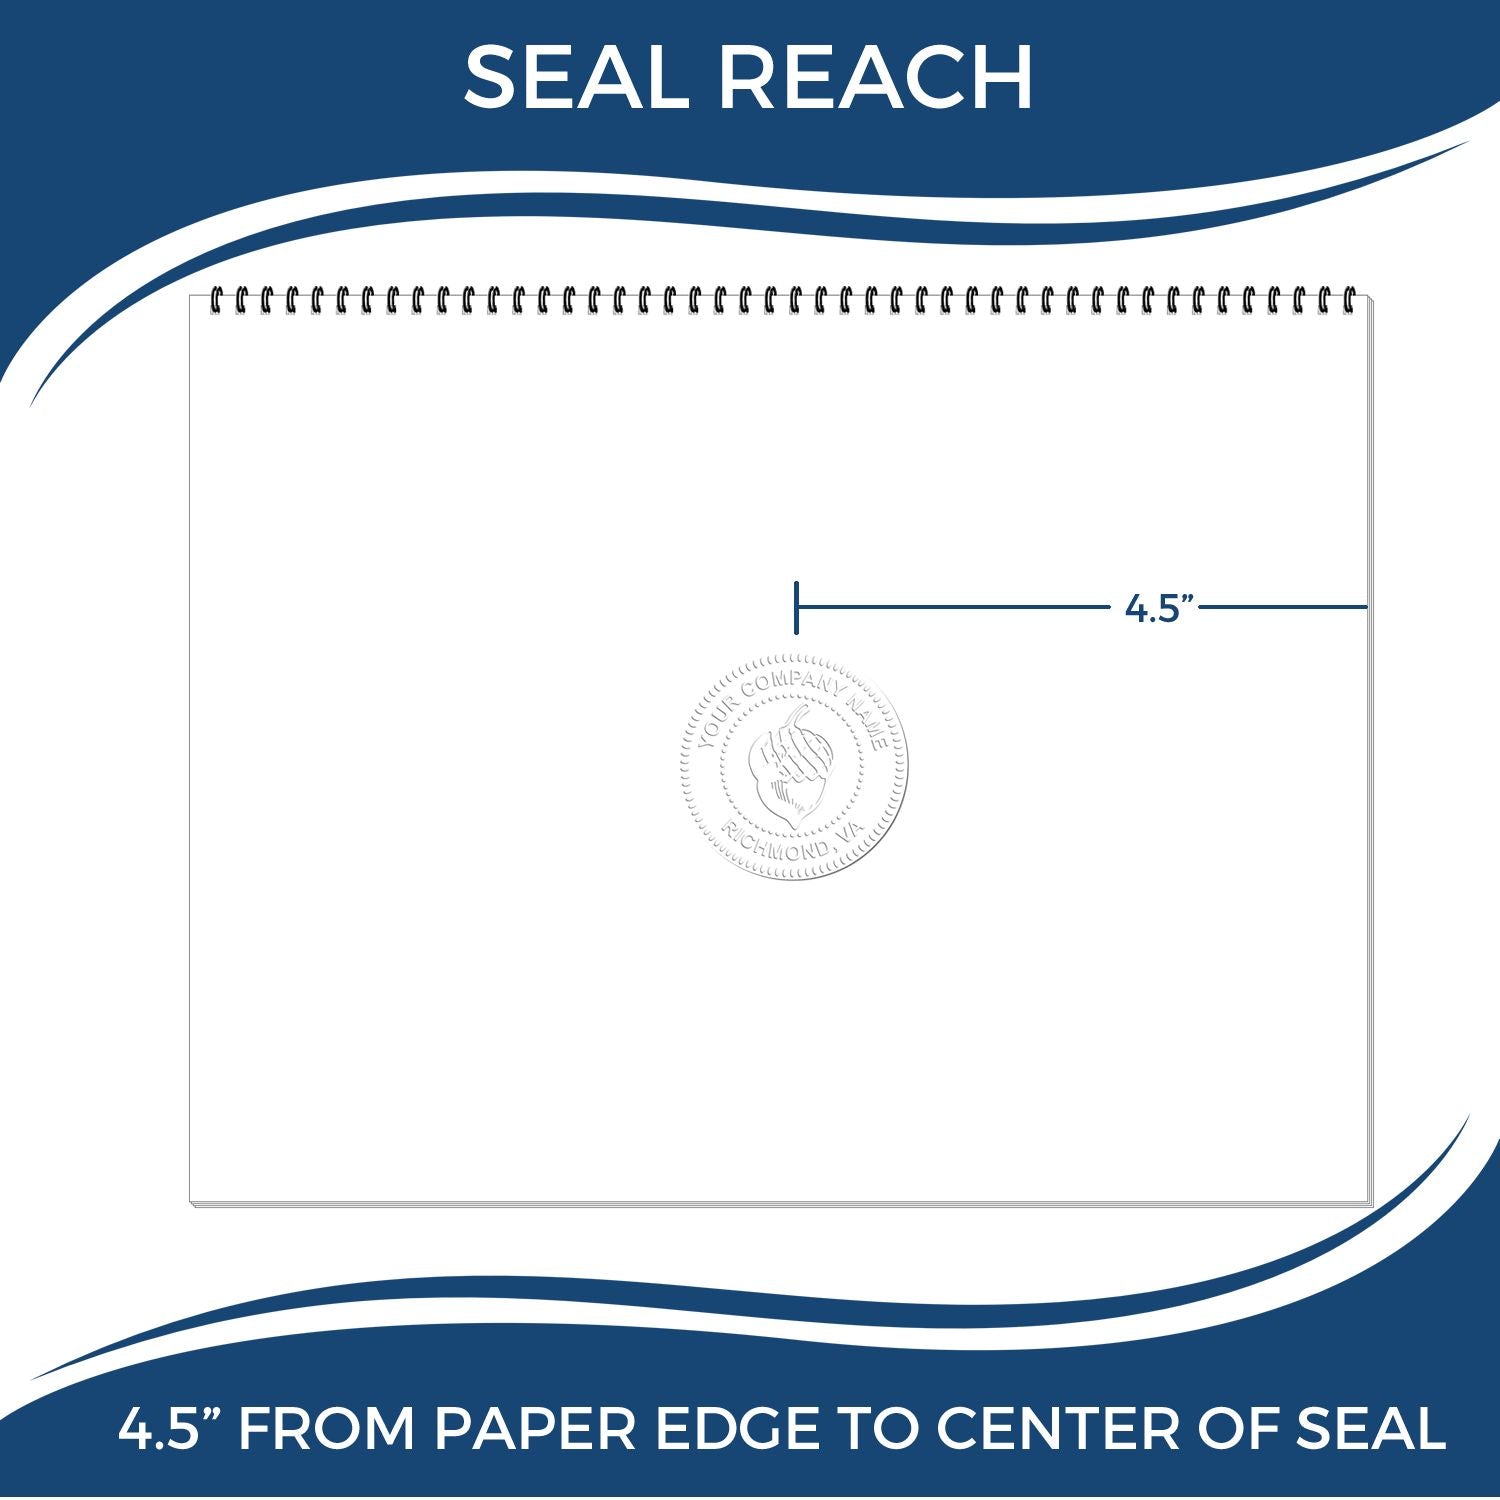 An infographic showing the seal reach which is represented by a ruler and a miniature seal image of the State of Montana Extended Long Reach Geologist Seal